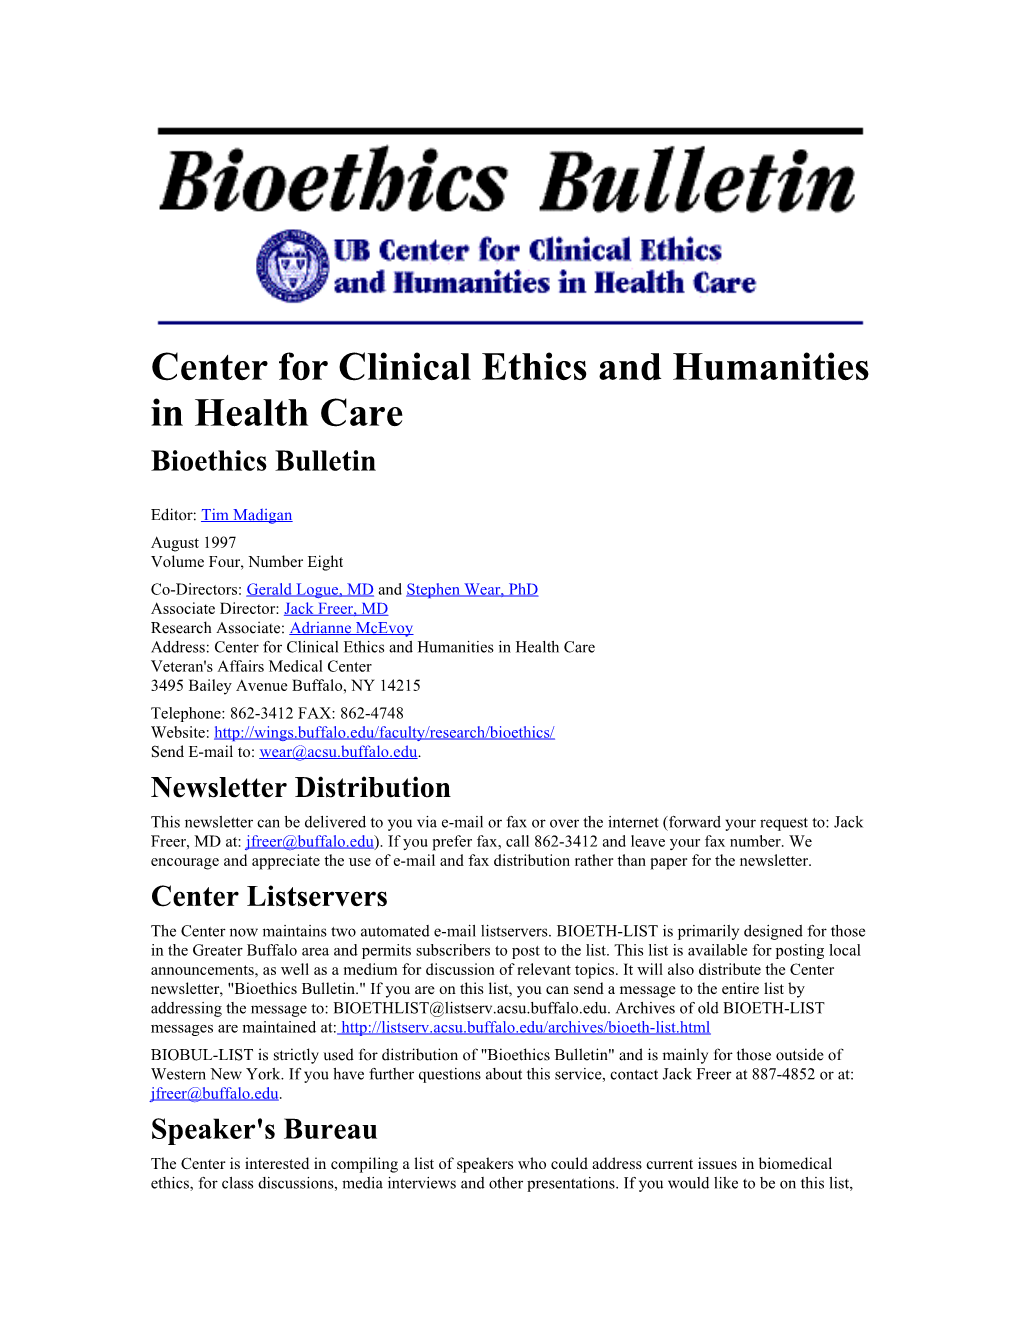 Center for Clinical Ethics and Humanities in Health Care s2